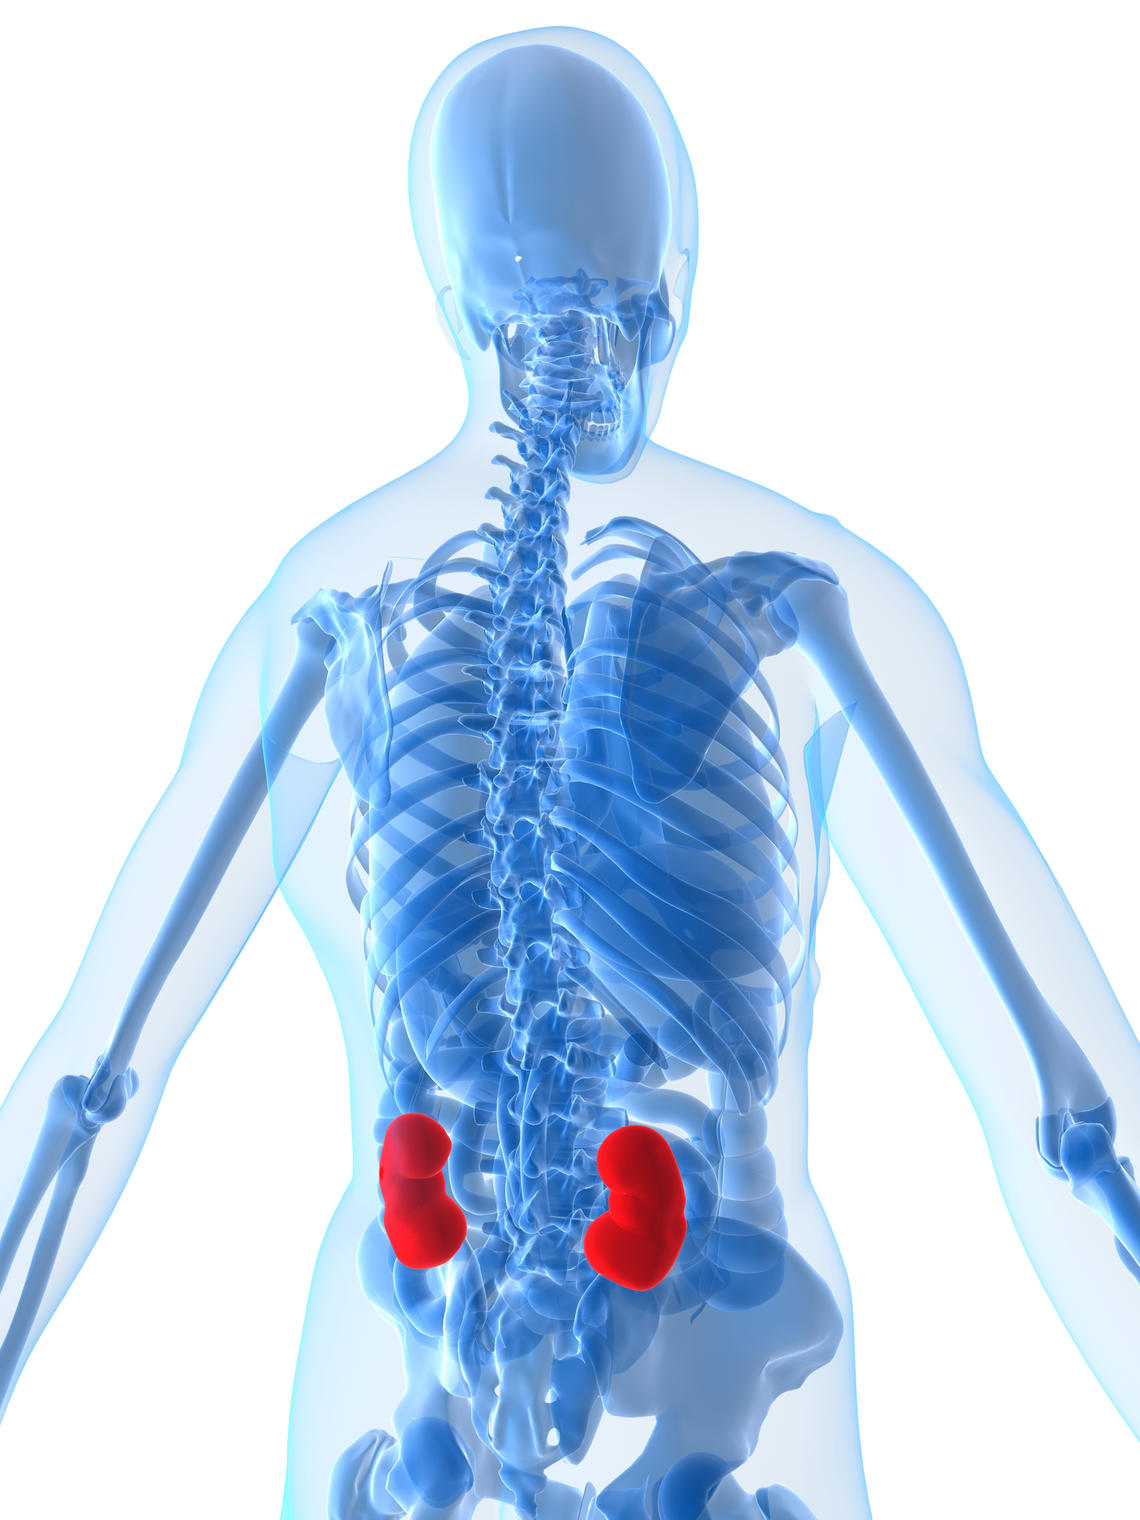 The kidneys are highlighted in red.